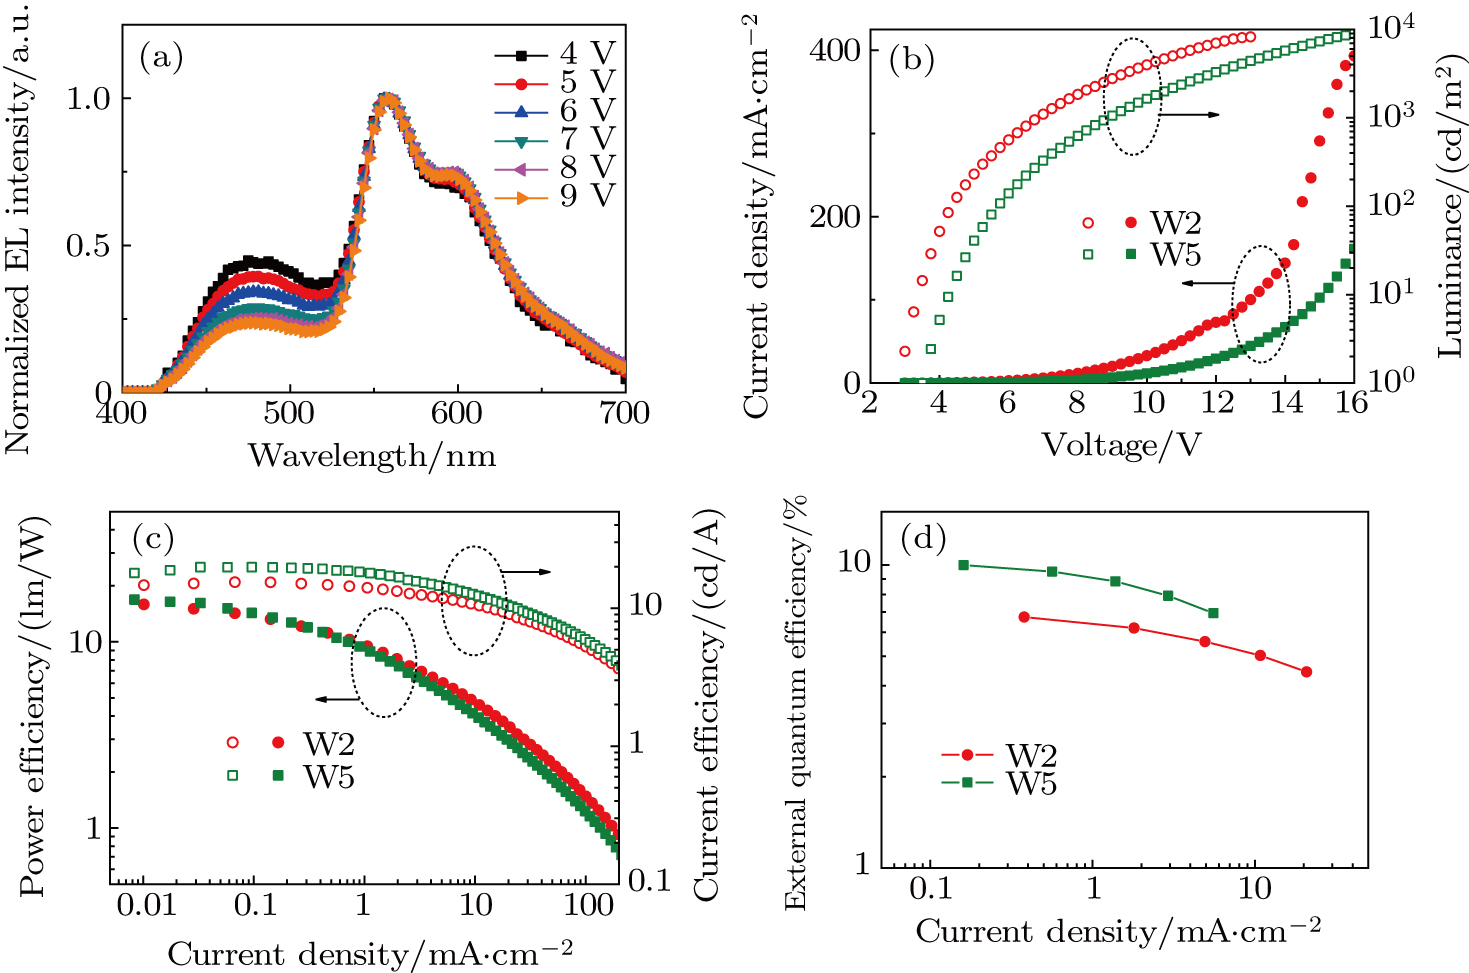 Enhancement Of Forster Energy Transfer From Thermally Activated Delayed Fluorophores Layer To Ultrathin Phosphor Layer For High Color Stability In Non Doped Hybrid White Organic Light Emitting Devices